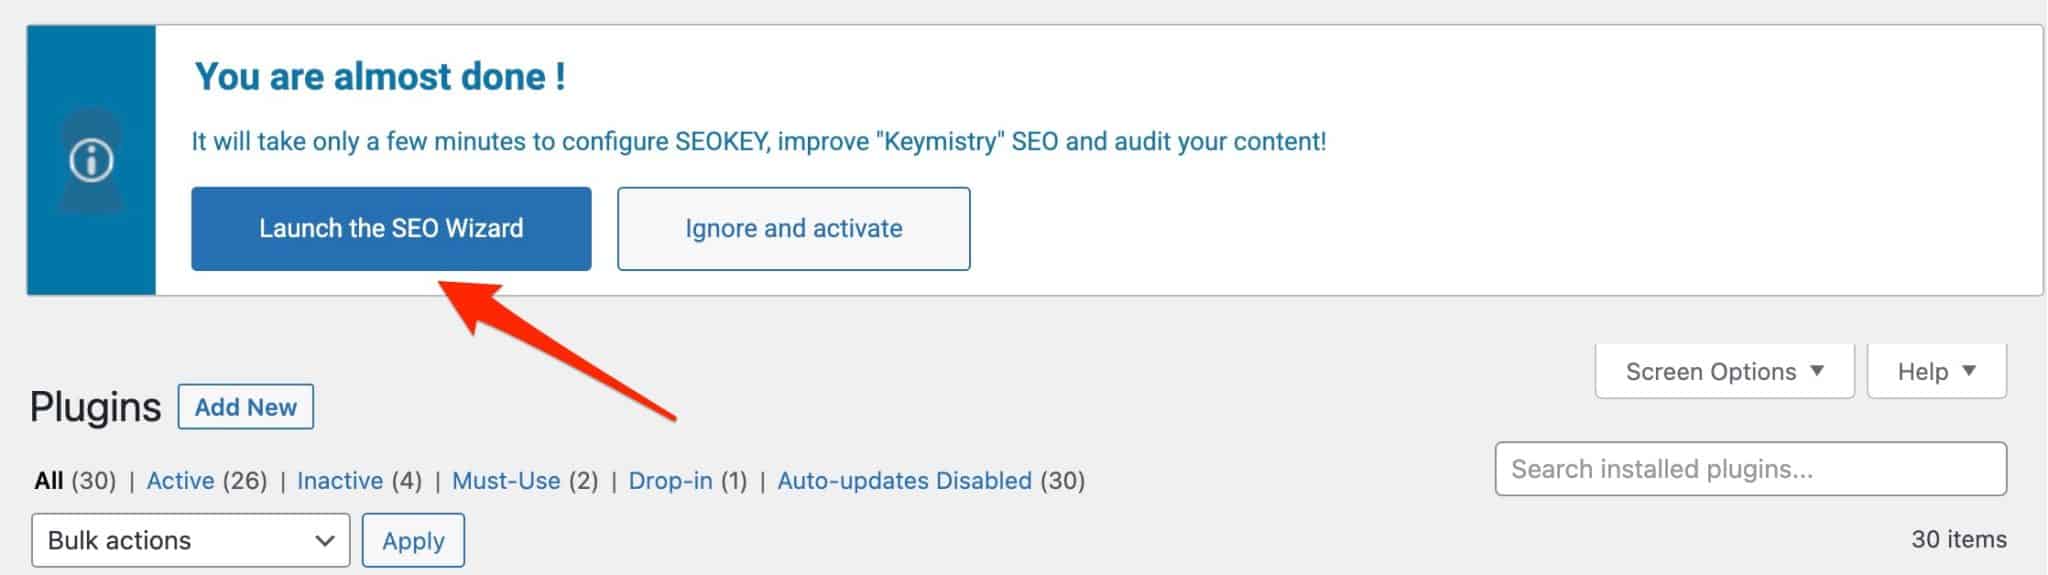 SEOKEY has a configuration wizard to help you set it up. 